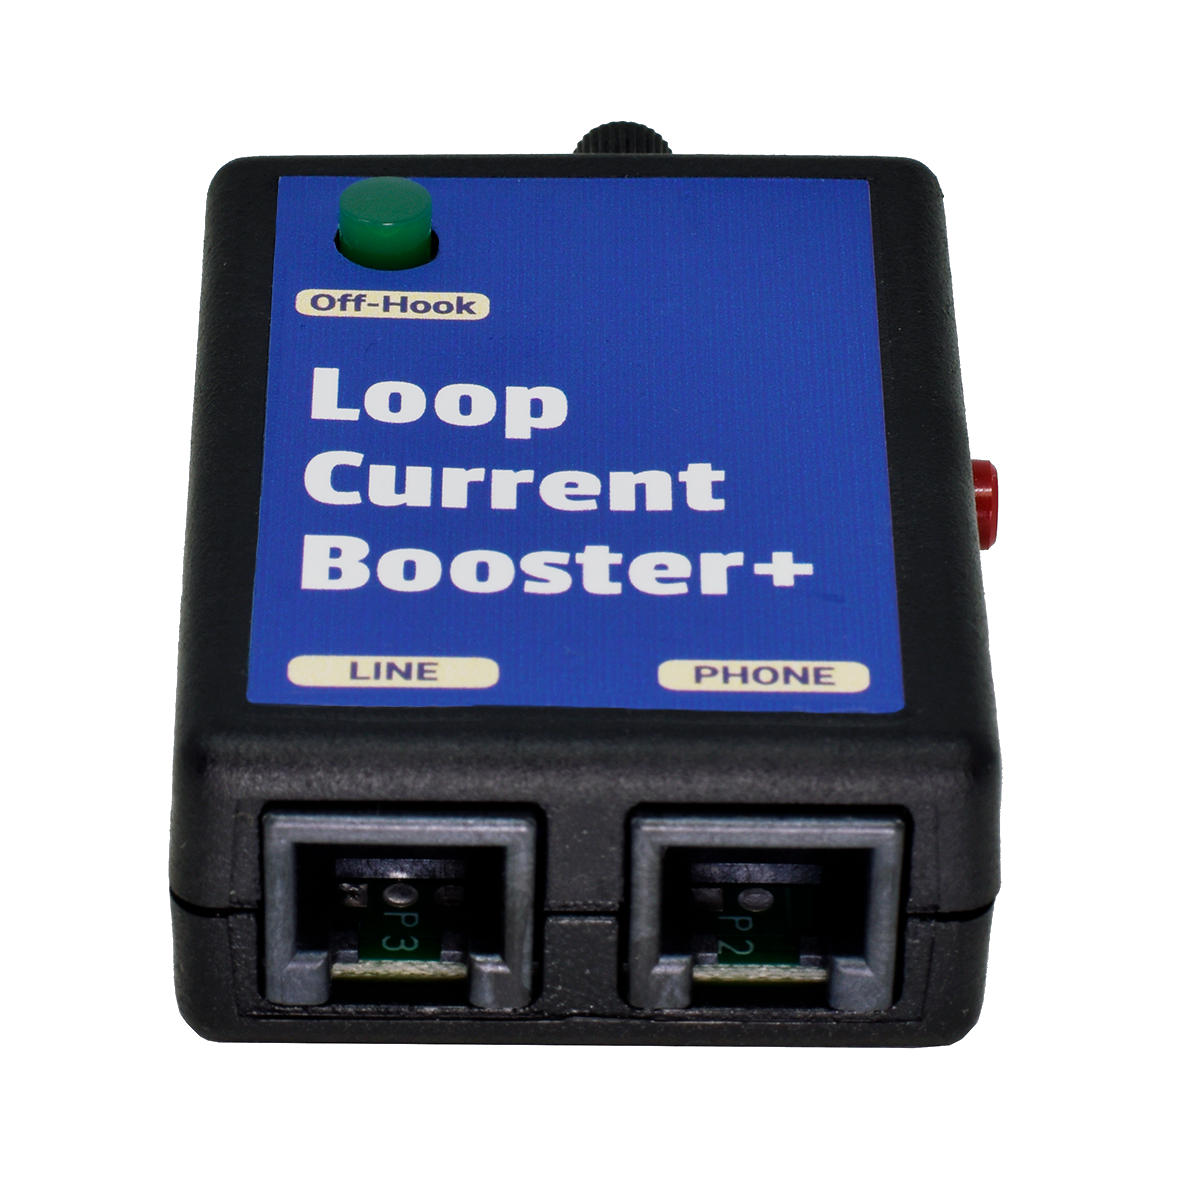 Loop Current Booster+ (Front View)